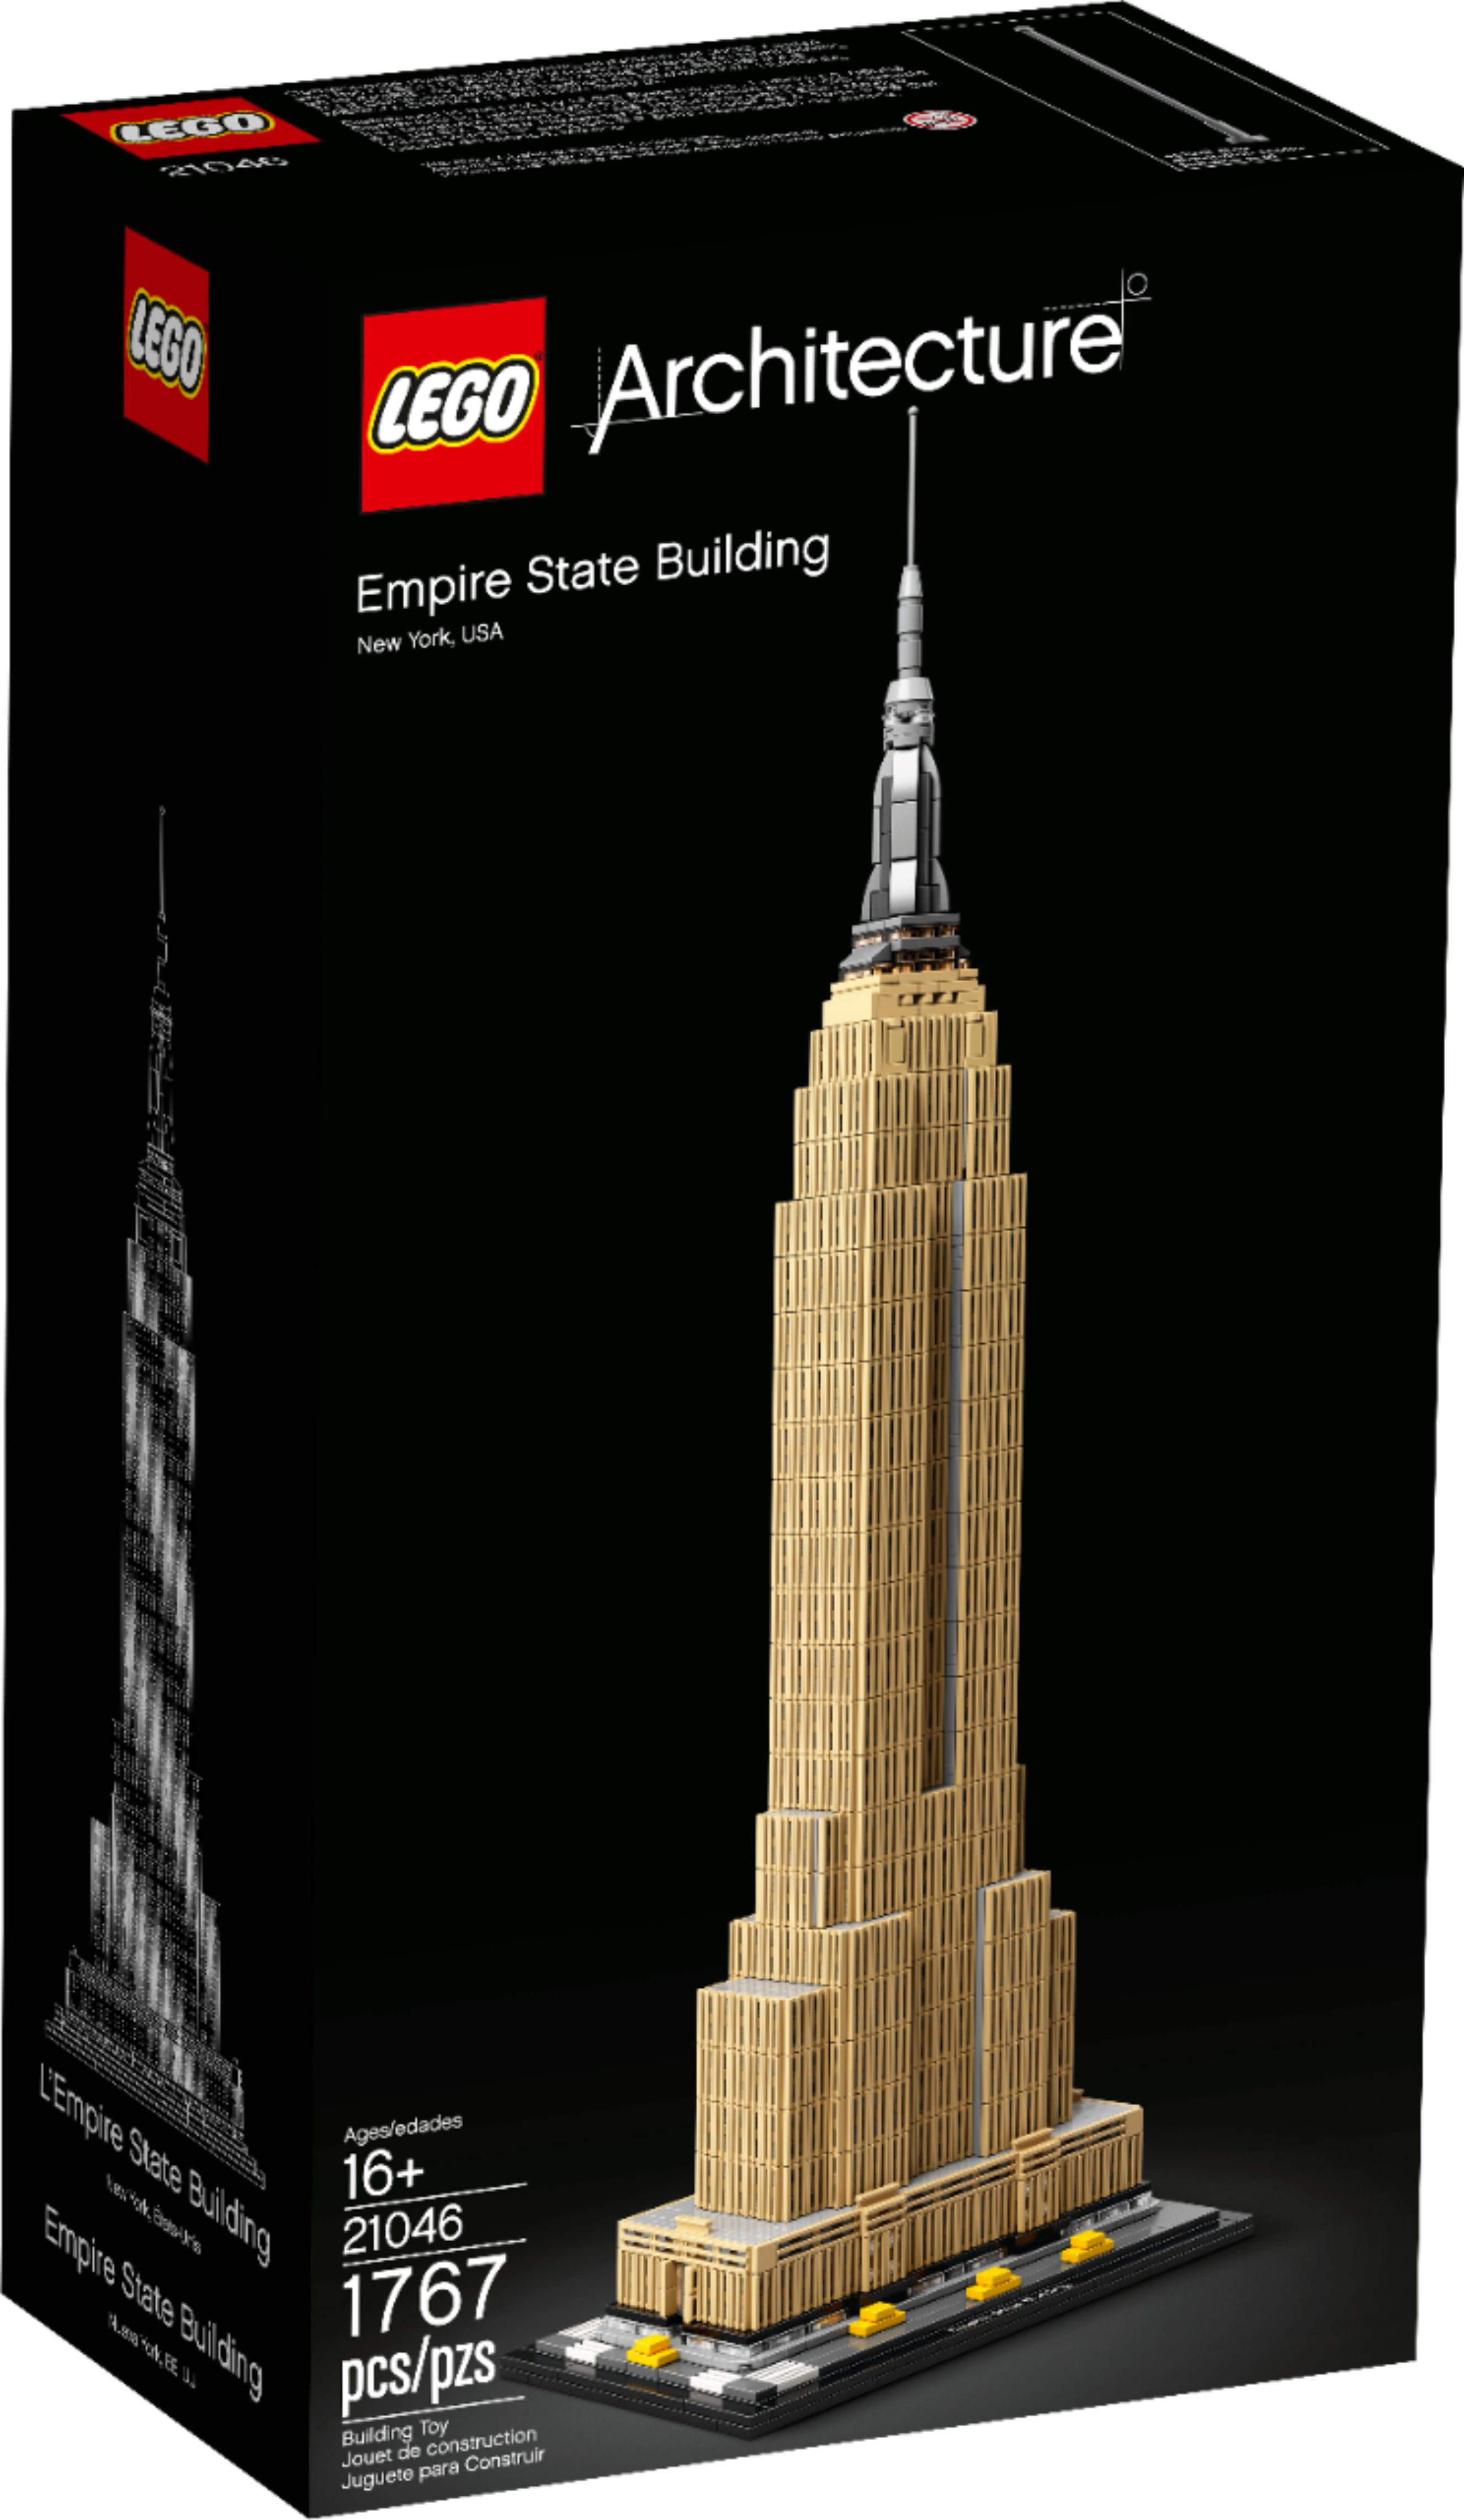 LEGO Architecture Empire State Building 21046 6250908 - Best Buy